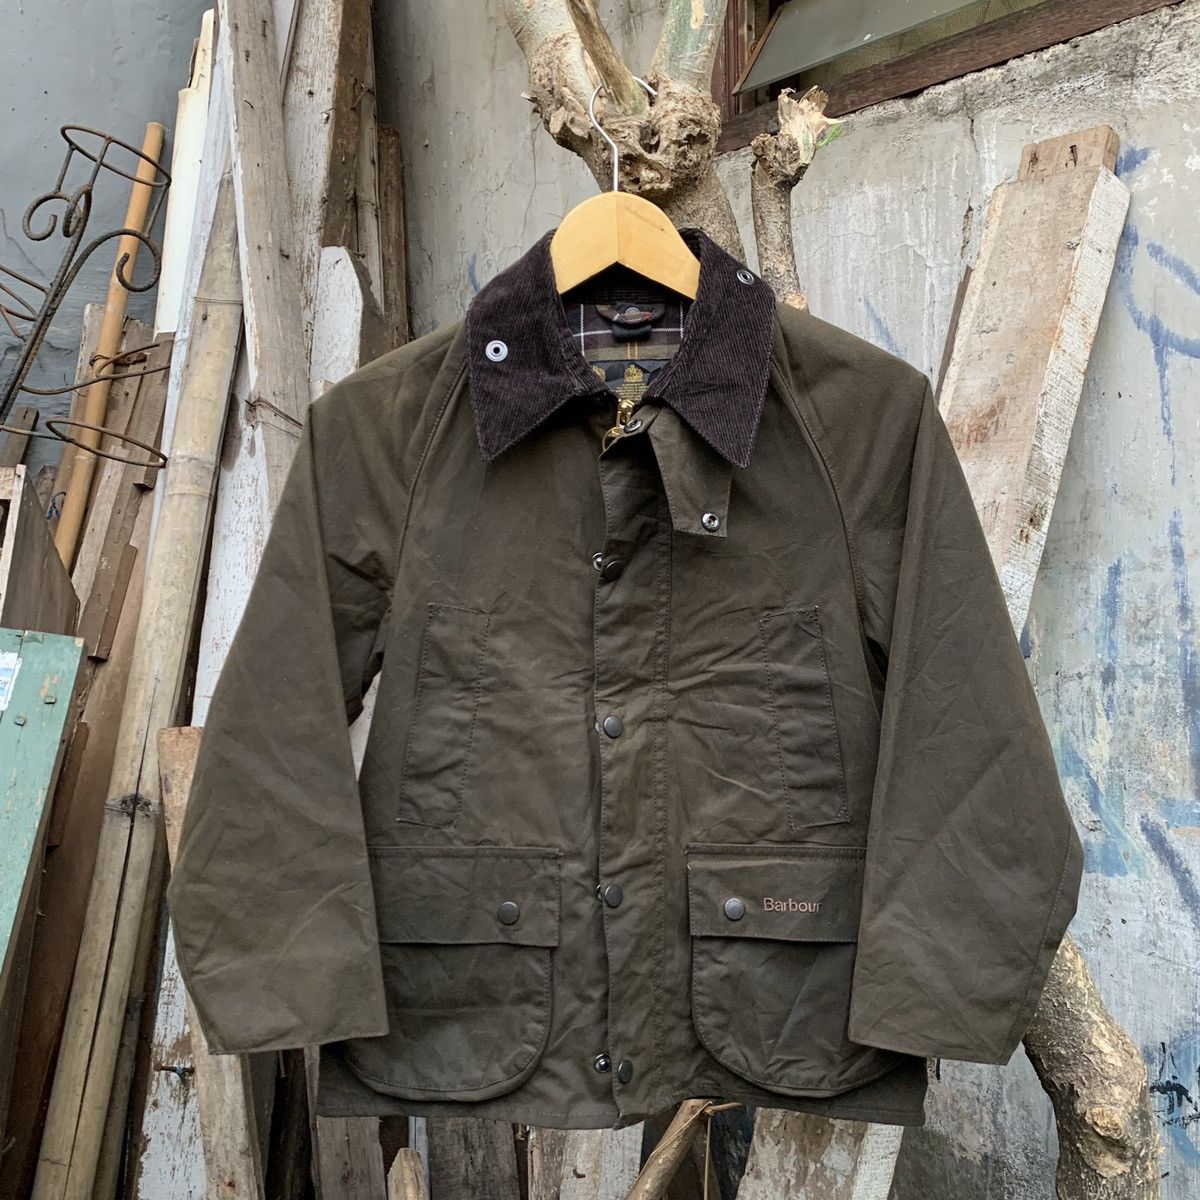 Barbour Rugged Barbour Casual Hooligans Wax Parka Jacket Kids | Grailed